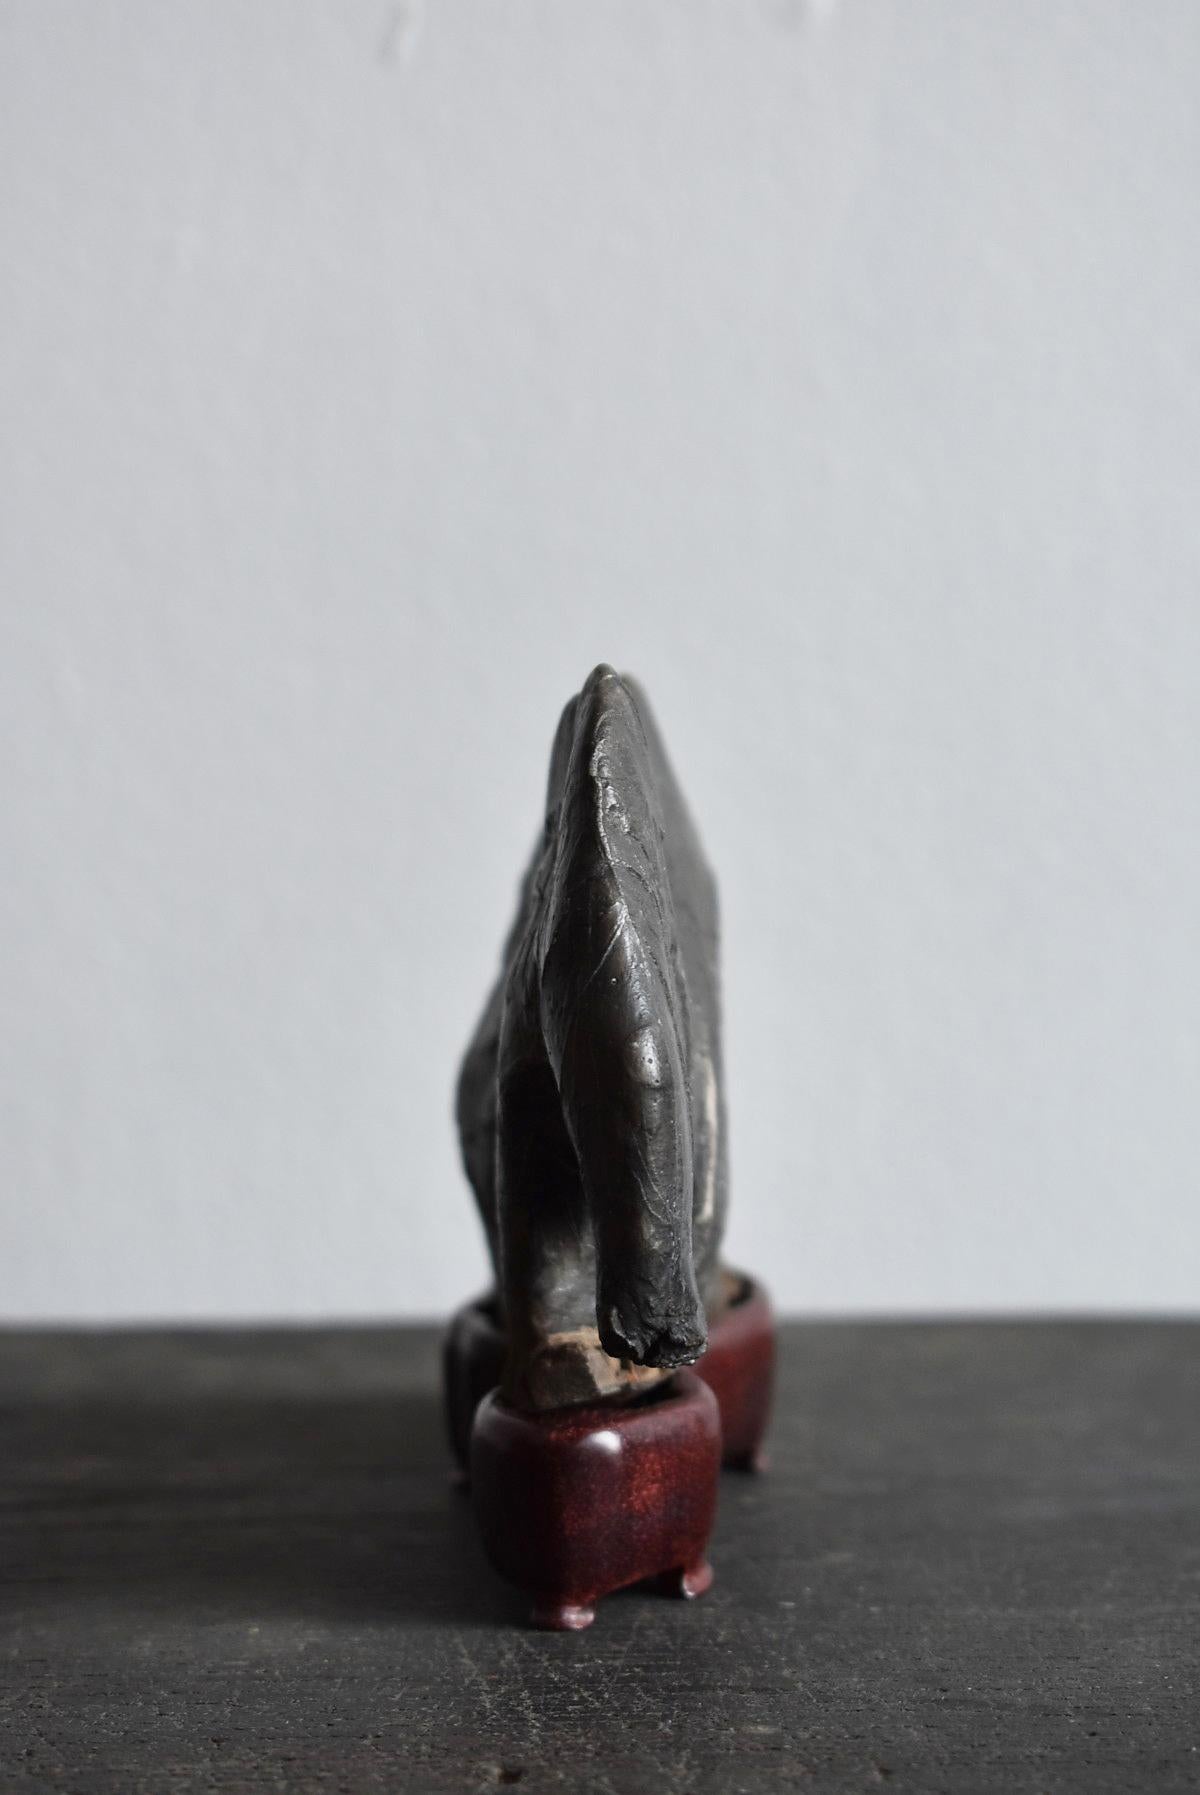 Hand-Carved Small Japanese Old Stone / Elephant-Shaped Ornamental Stone / Scholar's Objects